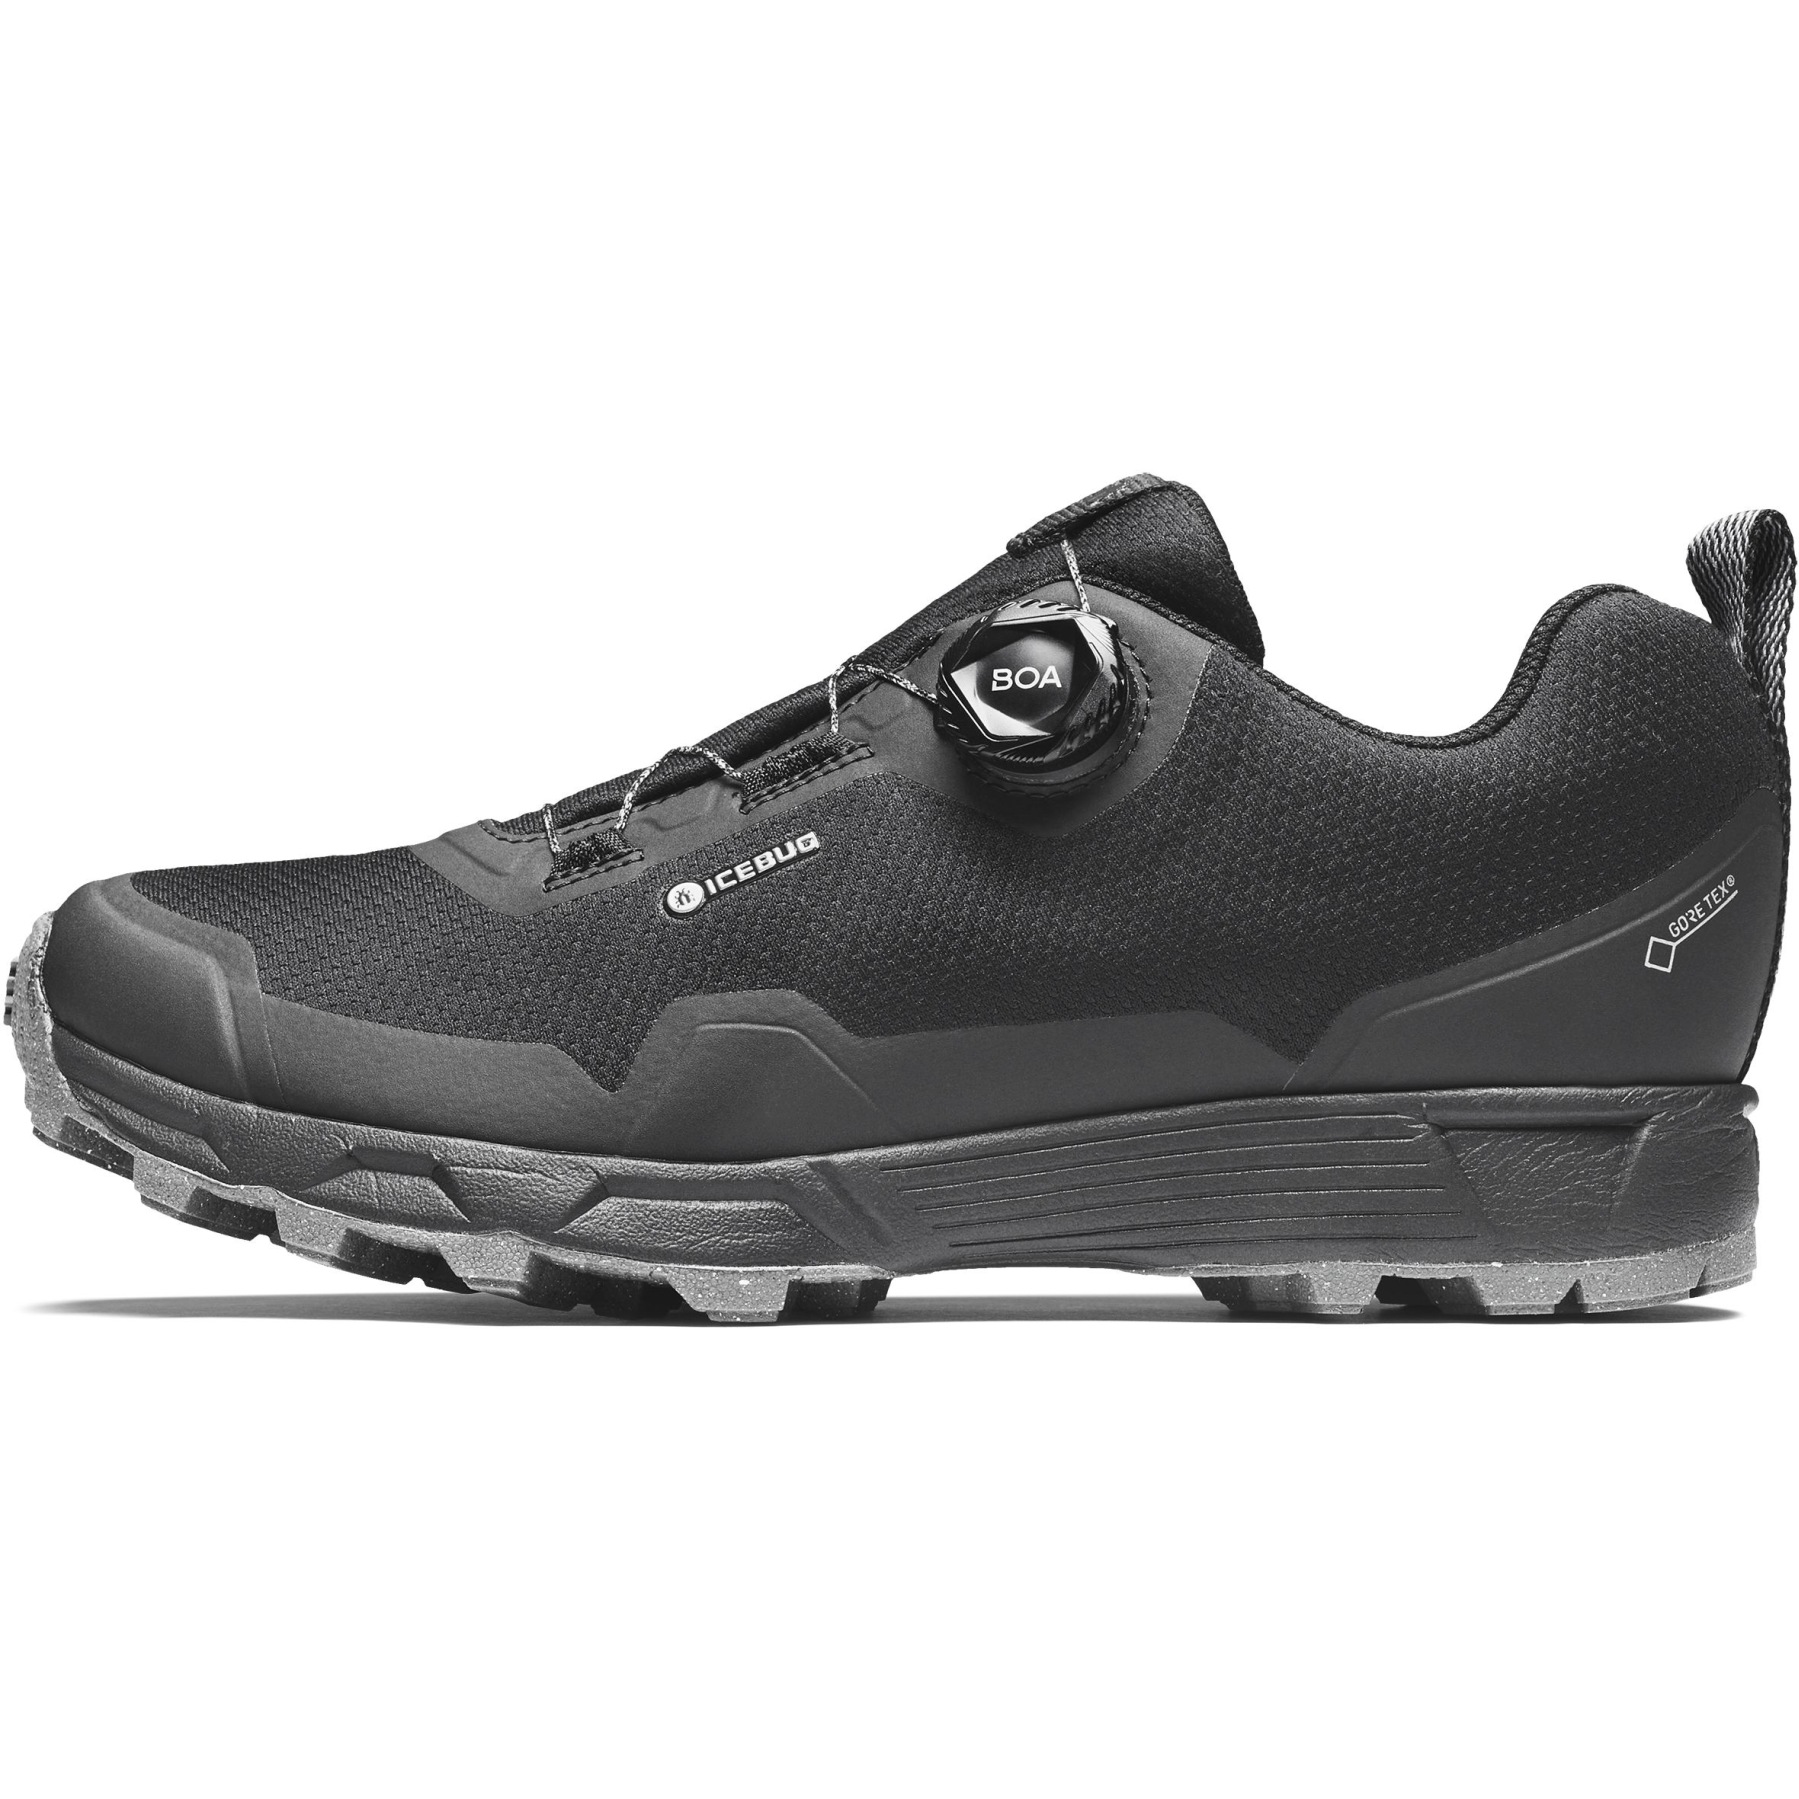 Picture of Icebug Rover RB9X GTX Shoes Women - black/slate grey